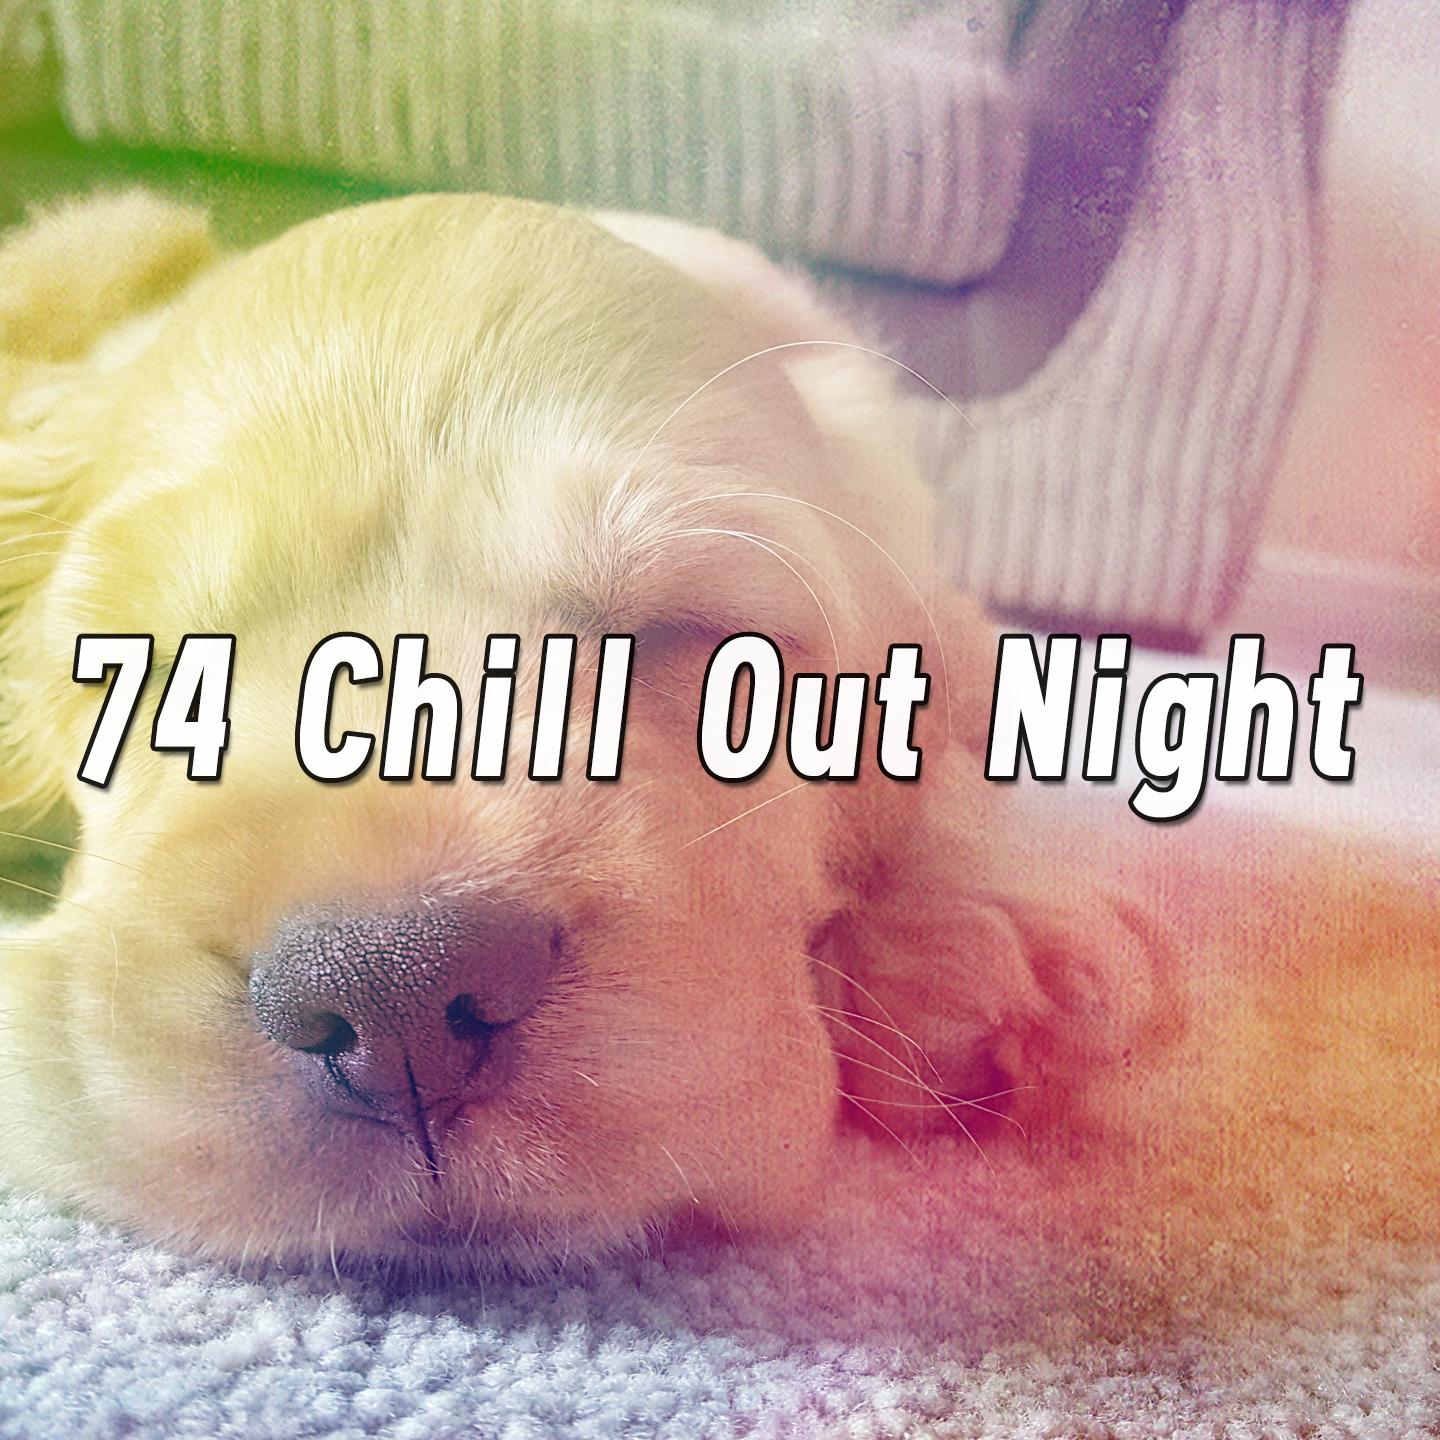 74 Chill out Night